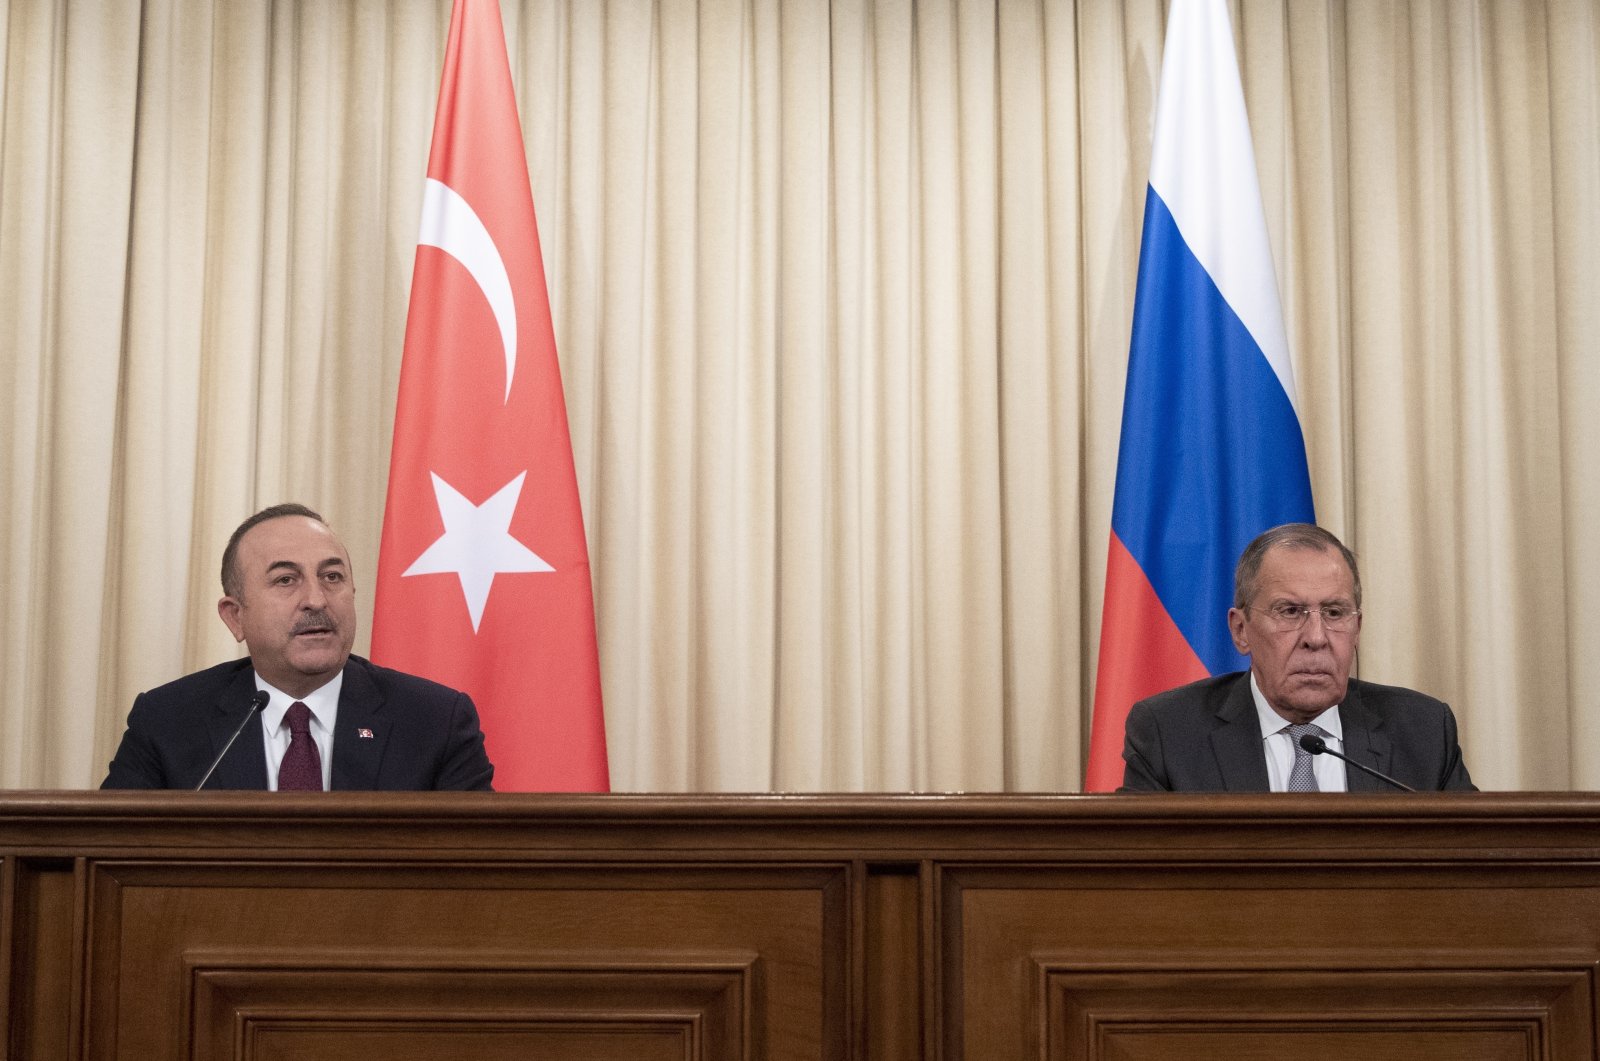 Foreign Minister Mevlüt Çavuşoğlu (L) and Russian Foreign Minister Sergey Lavrov attend a joint news conference following their talks in Moscow, Russia, Jan. 13, 2020. (AP File Photo)